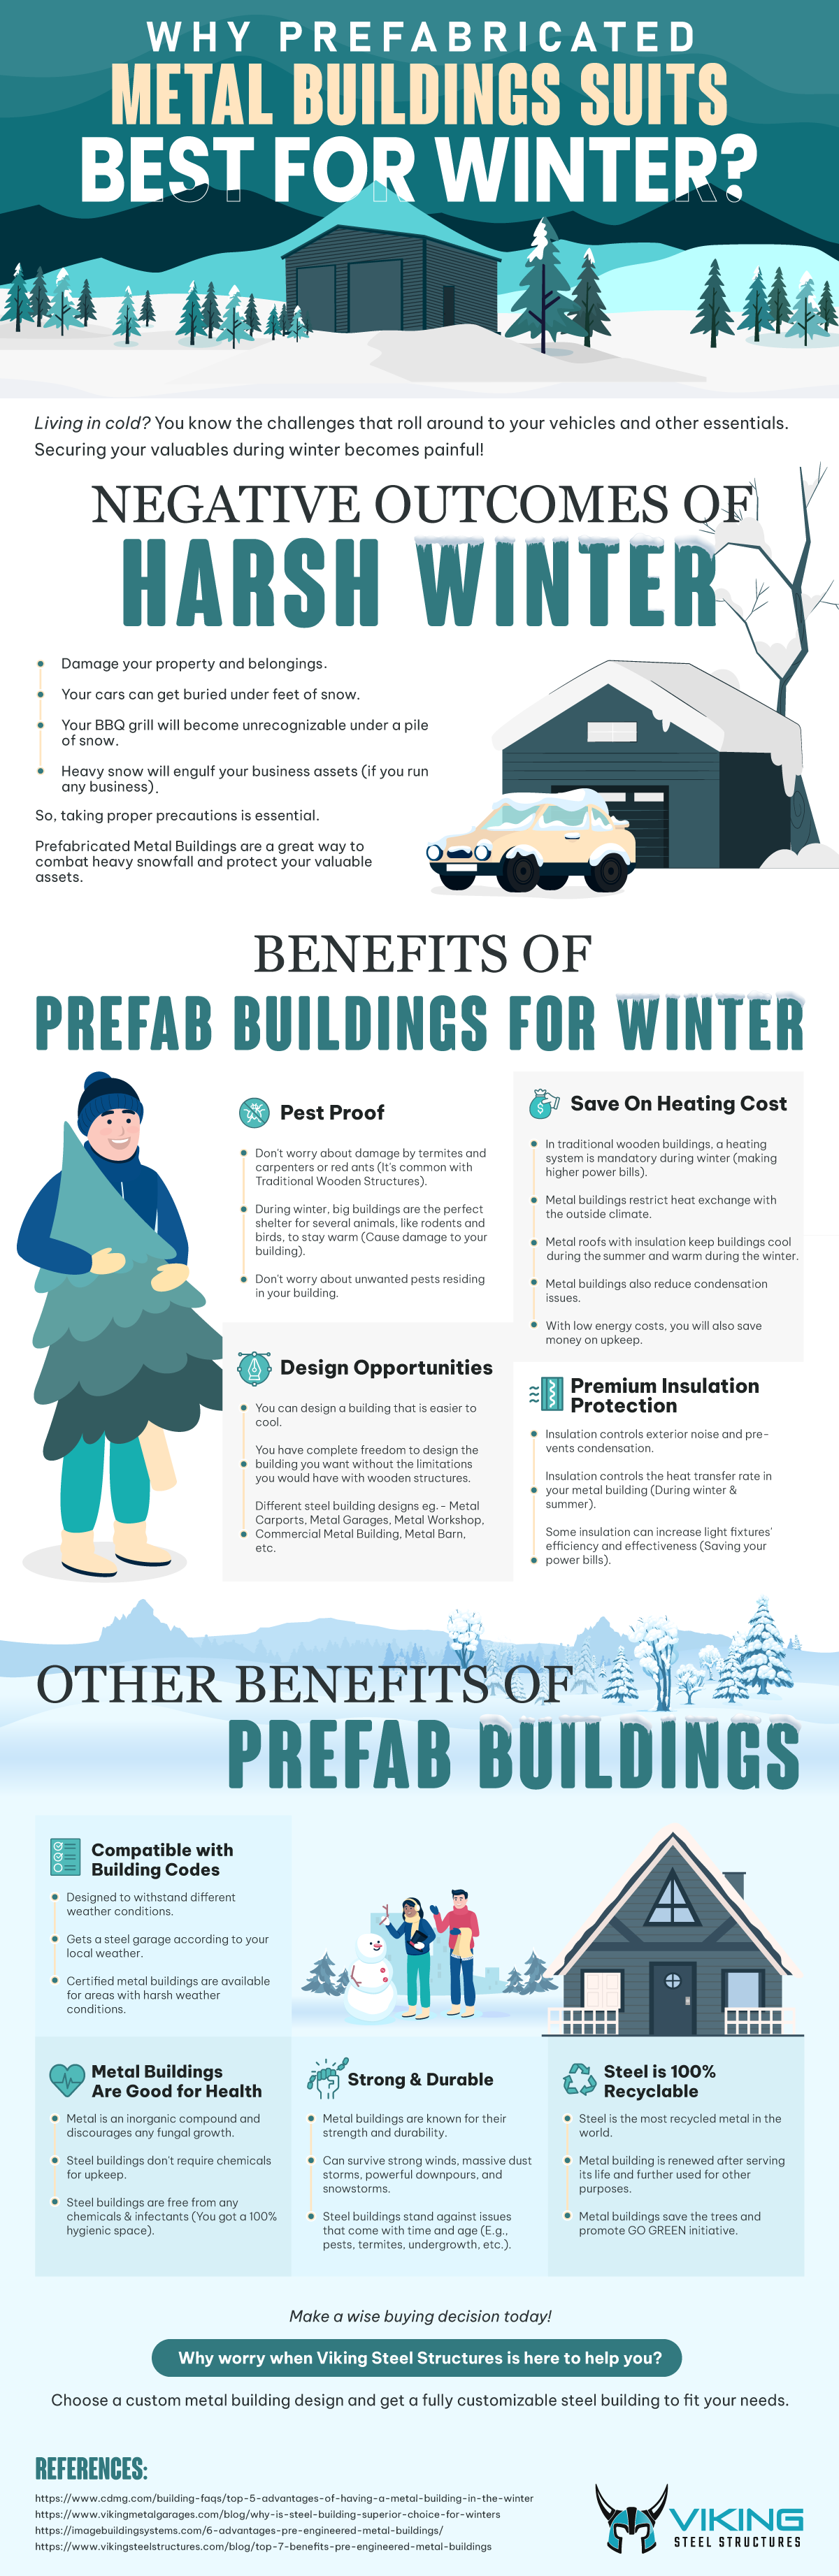 Why Prefabricated Metal Buildings Suits Best For Winter